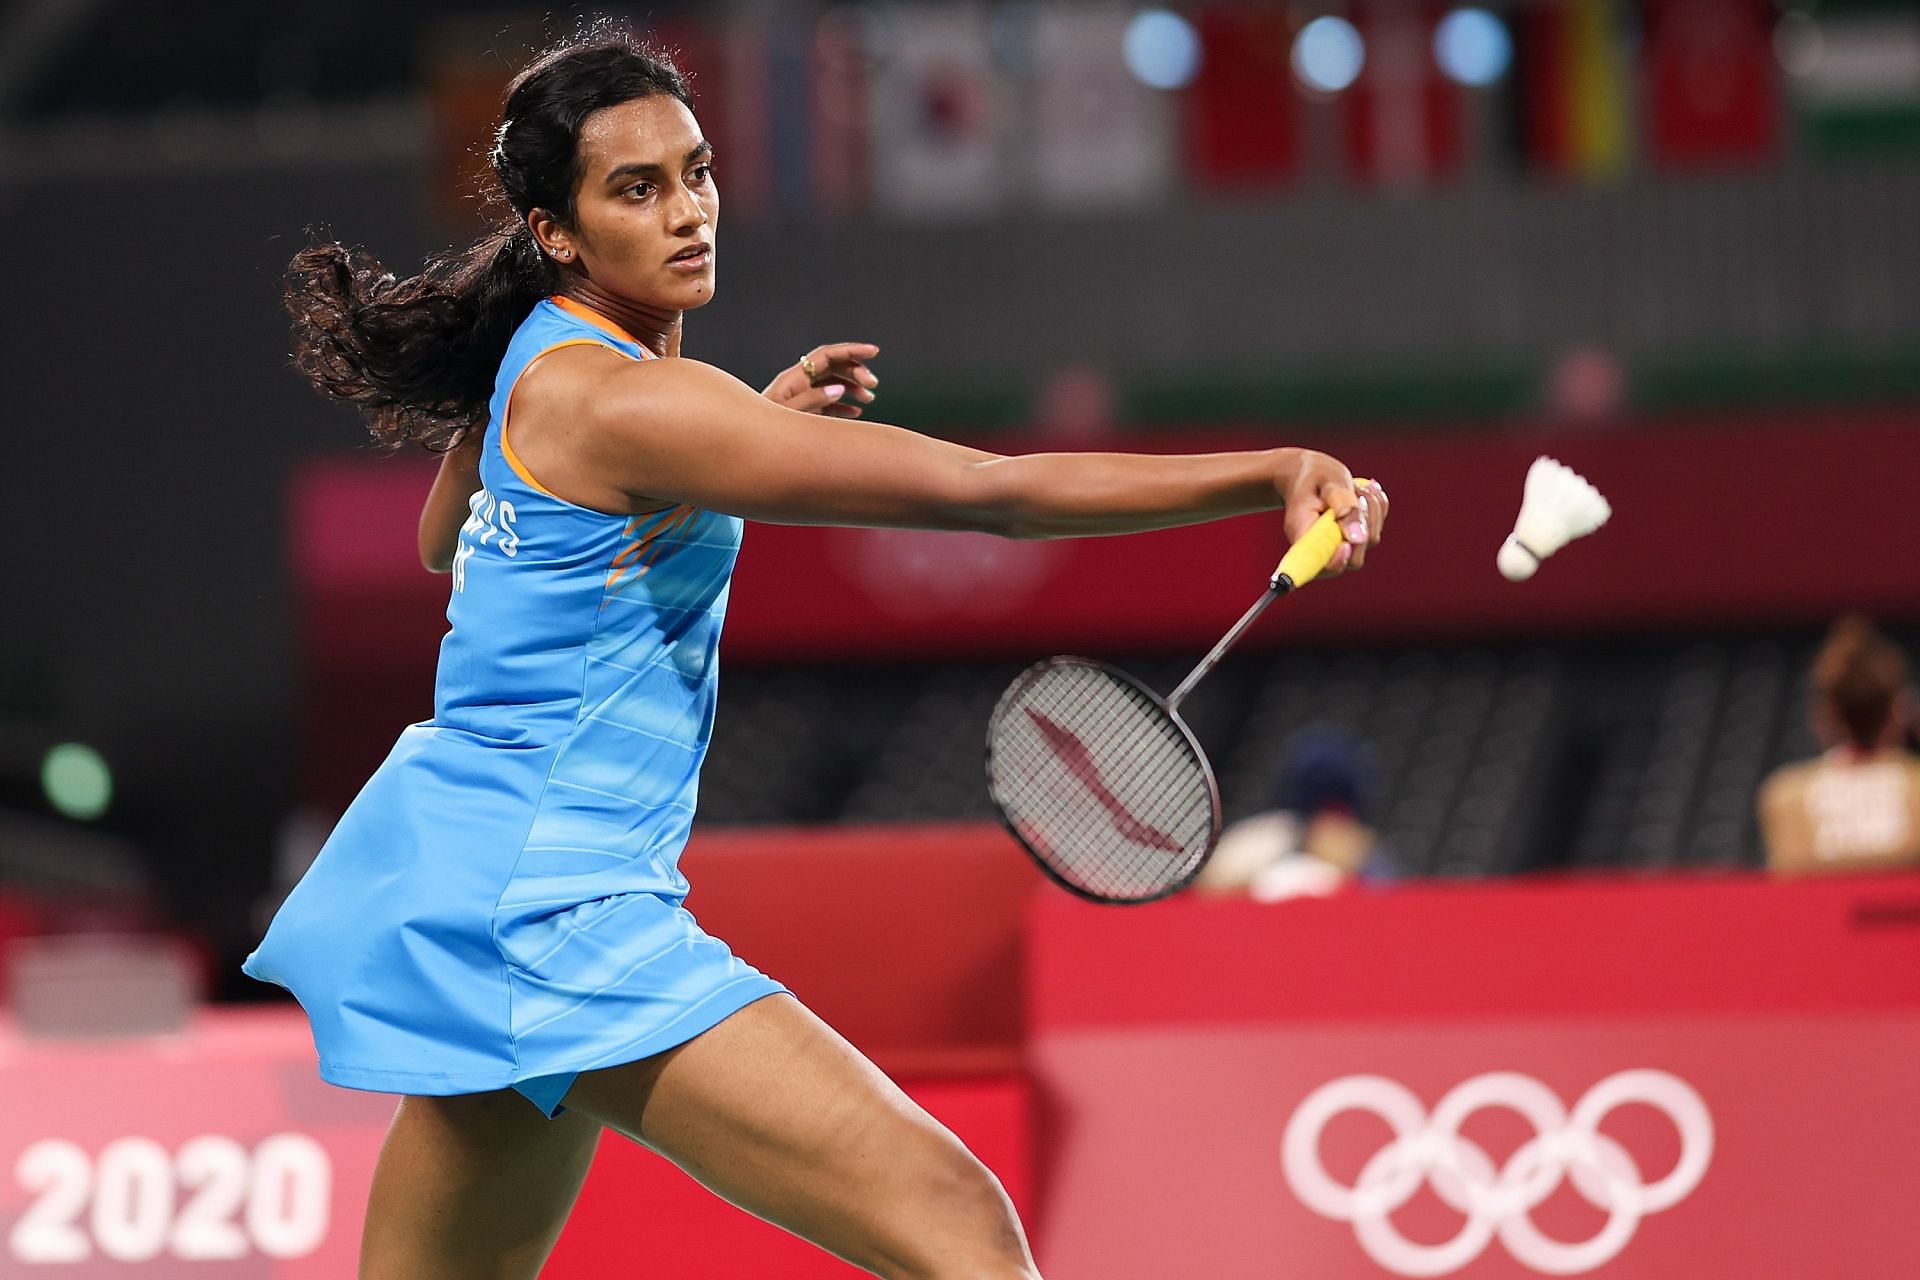 Fourth seed PV Sindhu beat fifth seed He Bing Jiao of China 21-9, 13-21, 21-19 on Friday. (File Photo)